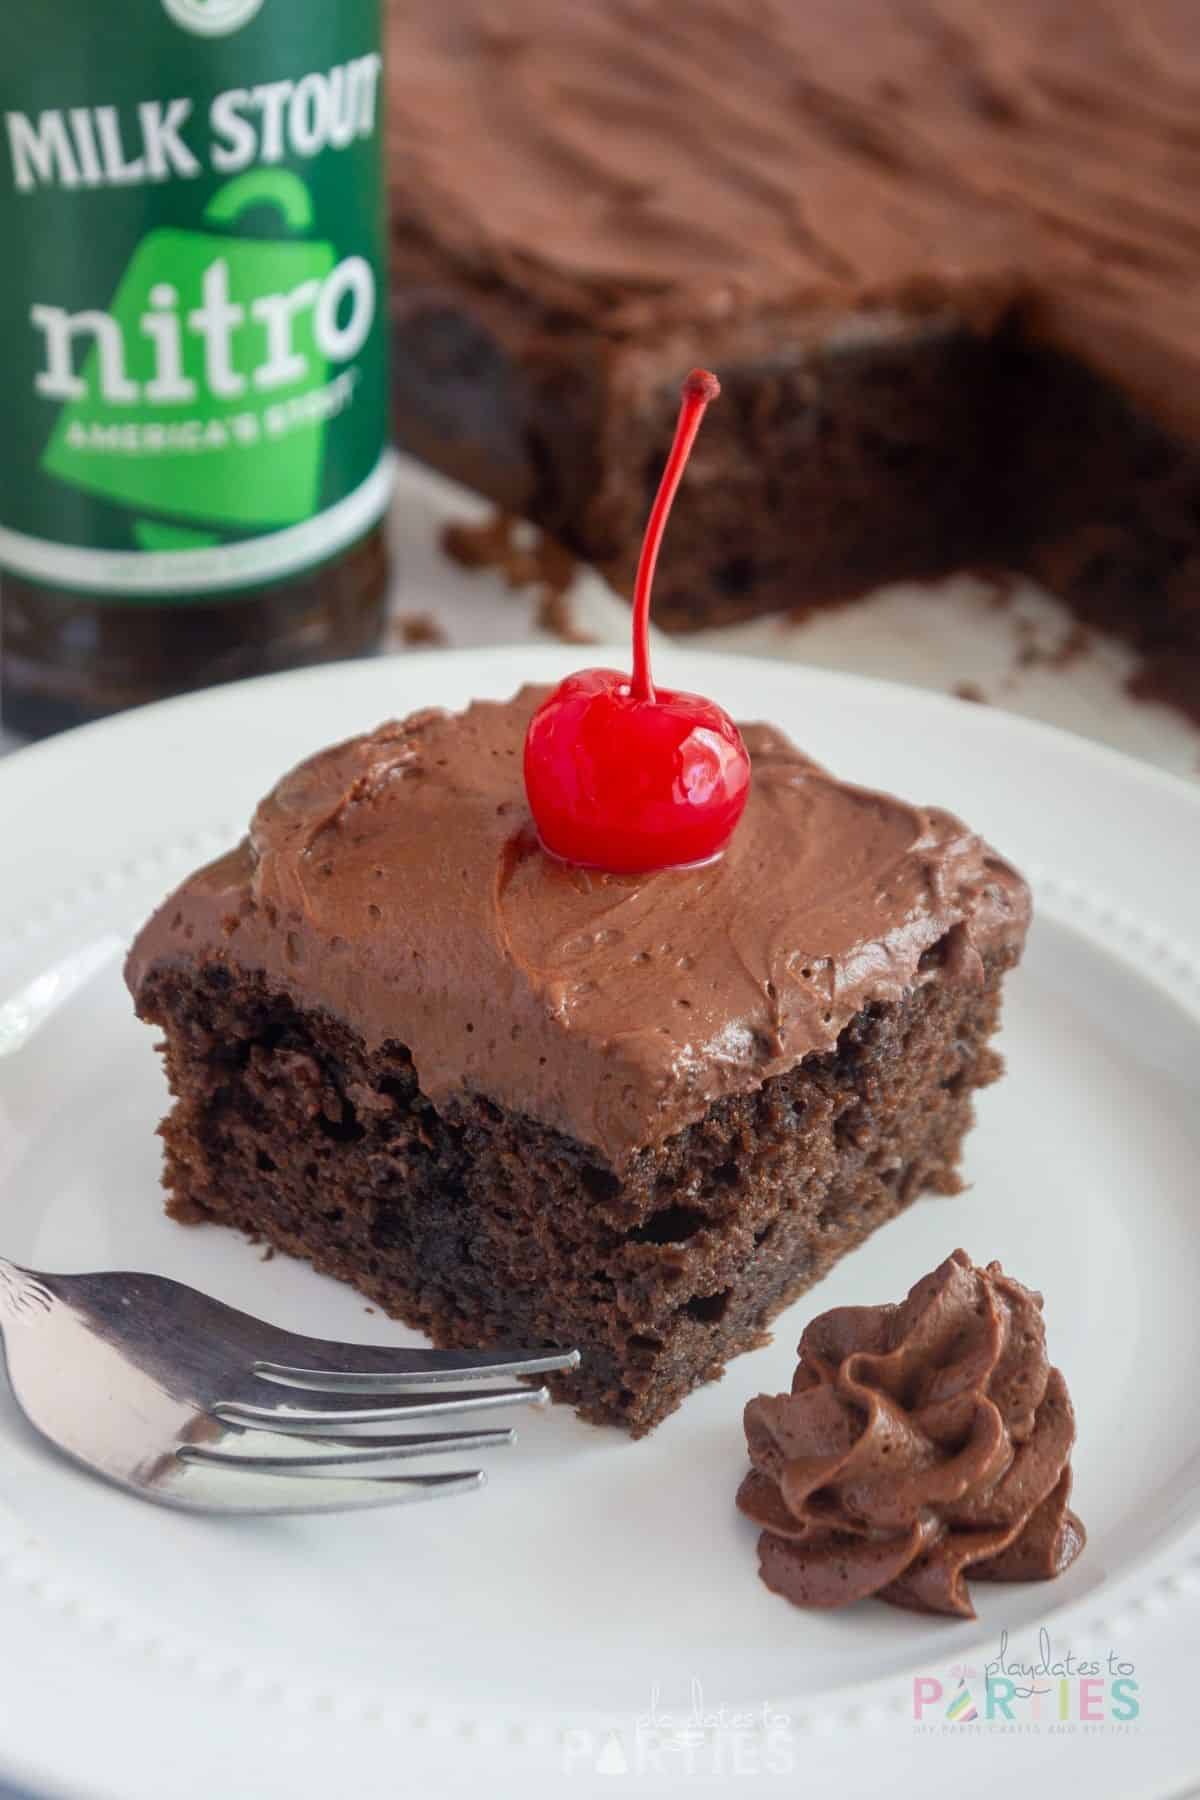 A slice of chocolate sheet cake on a plate in front of a bottle of beer.